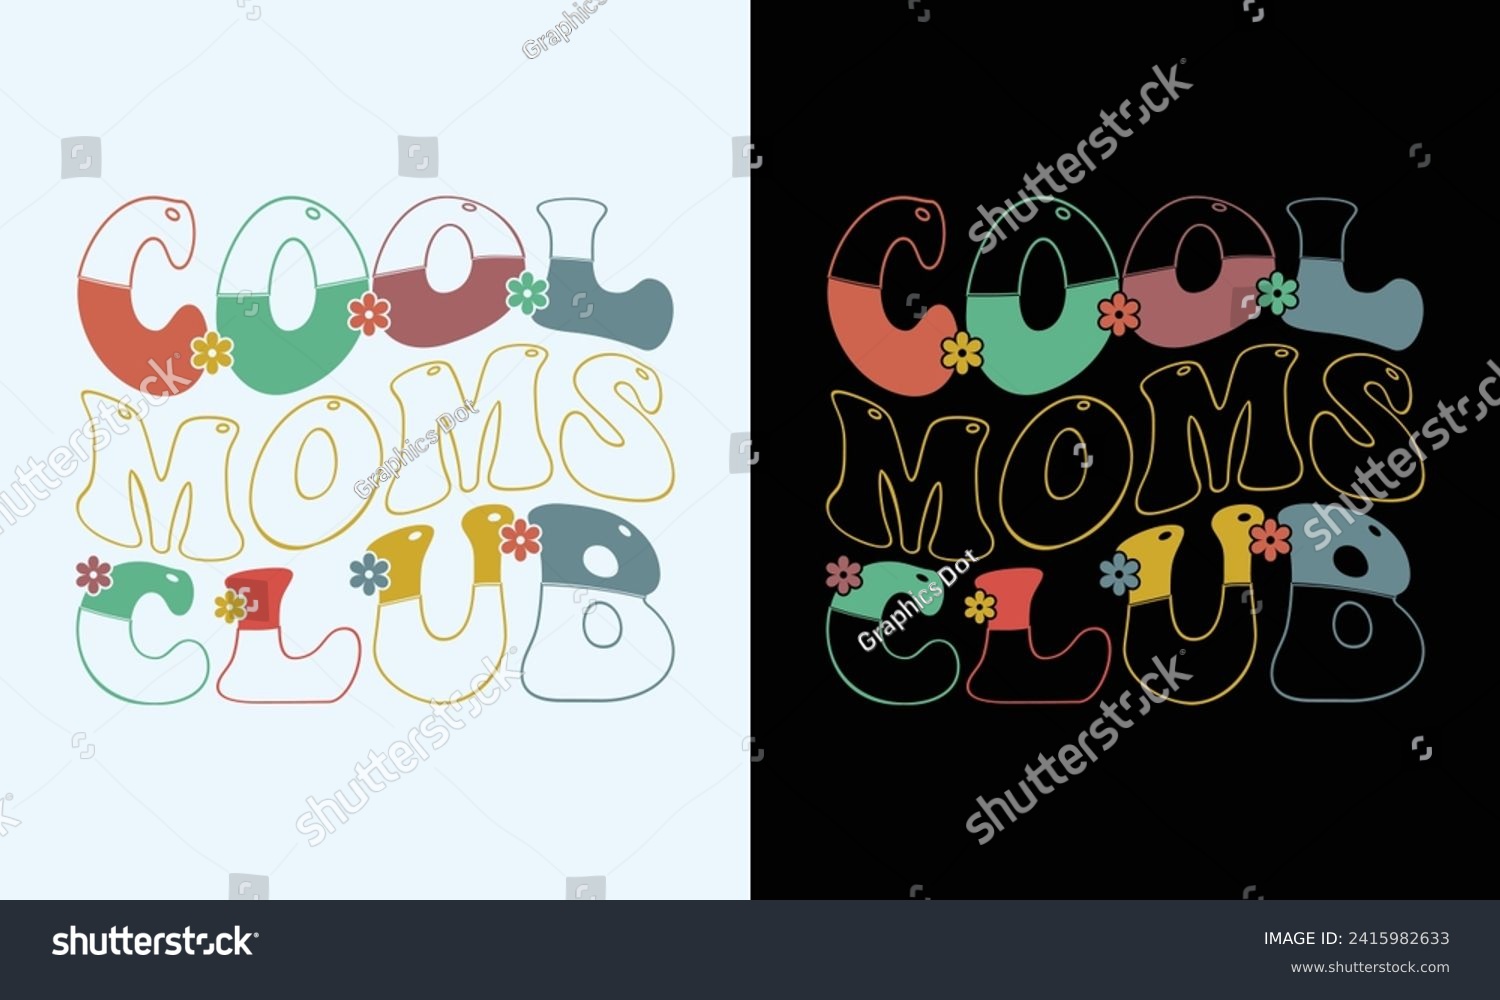 SVG of Mom Cut File,Happy Mother's Day Design,Cool Moms Club Retro Design,Best Mom Day Design,gift, lover,Cool moms club quote retro wavy colorful Design svg